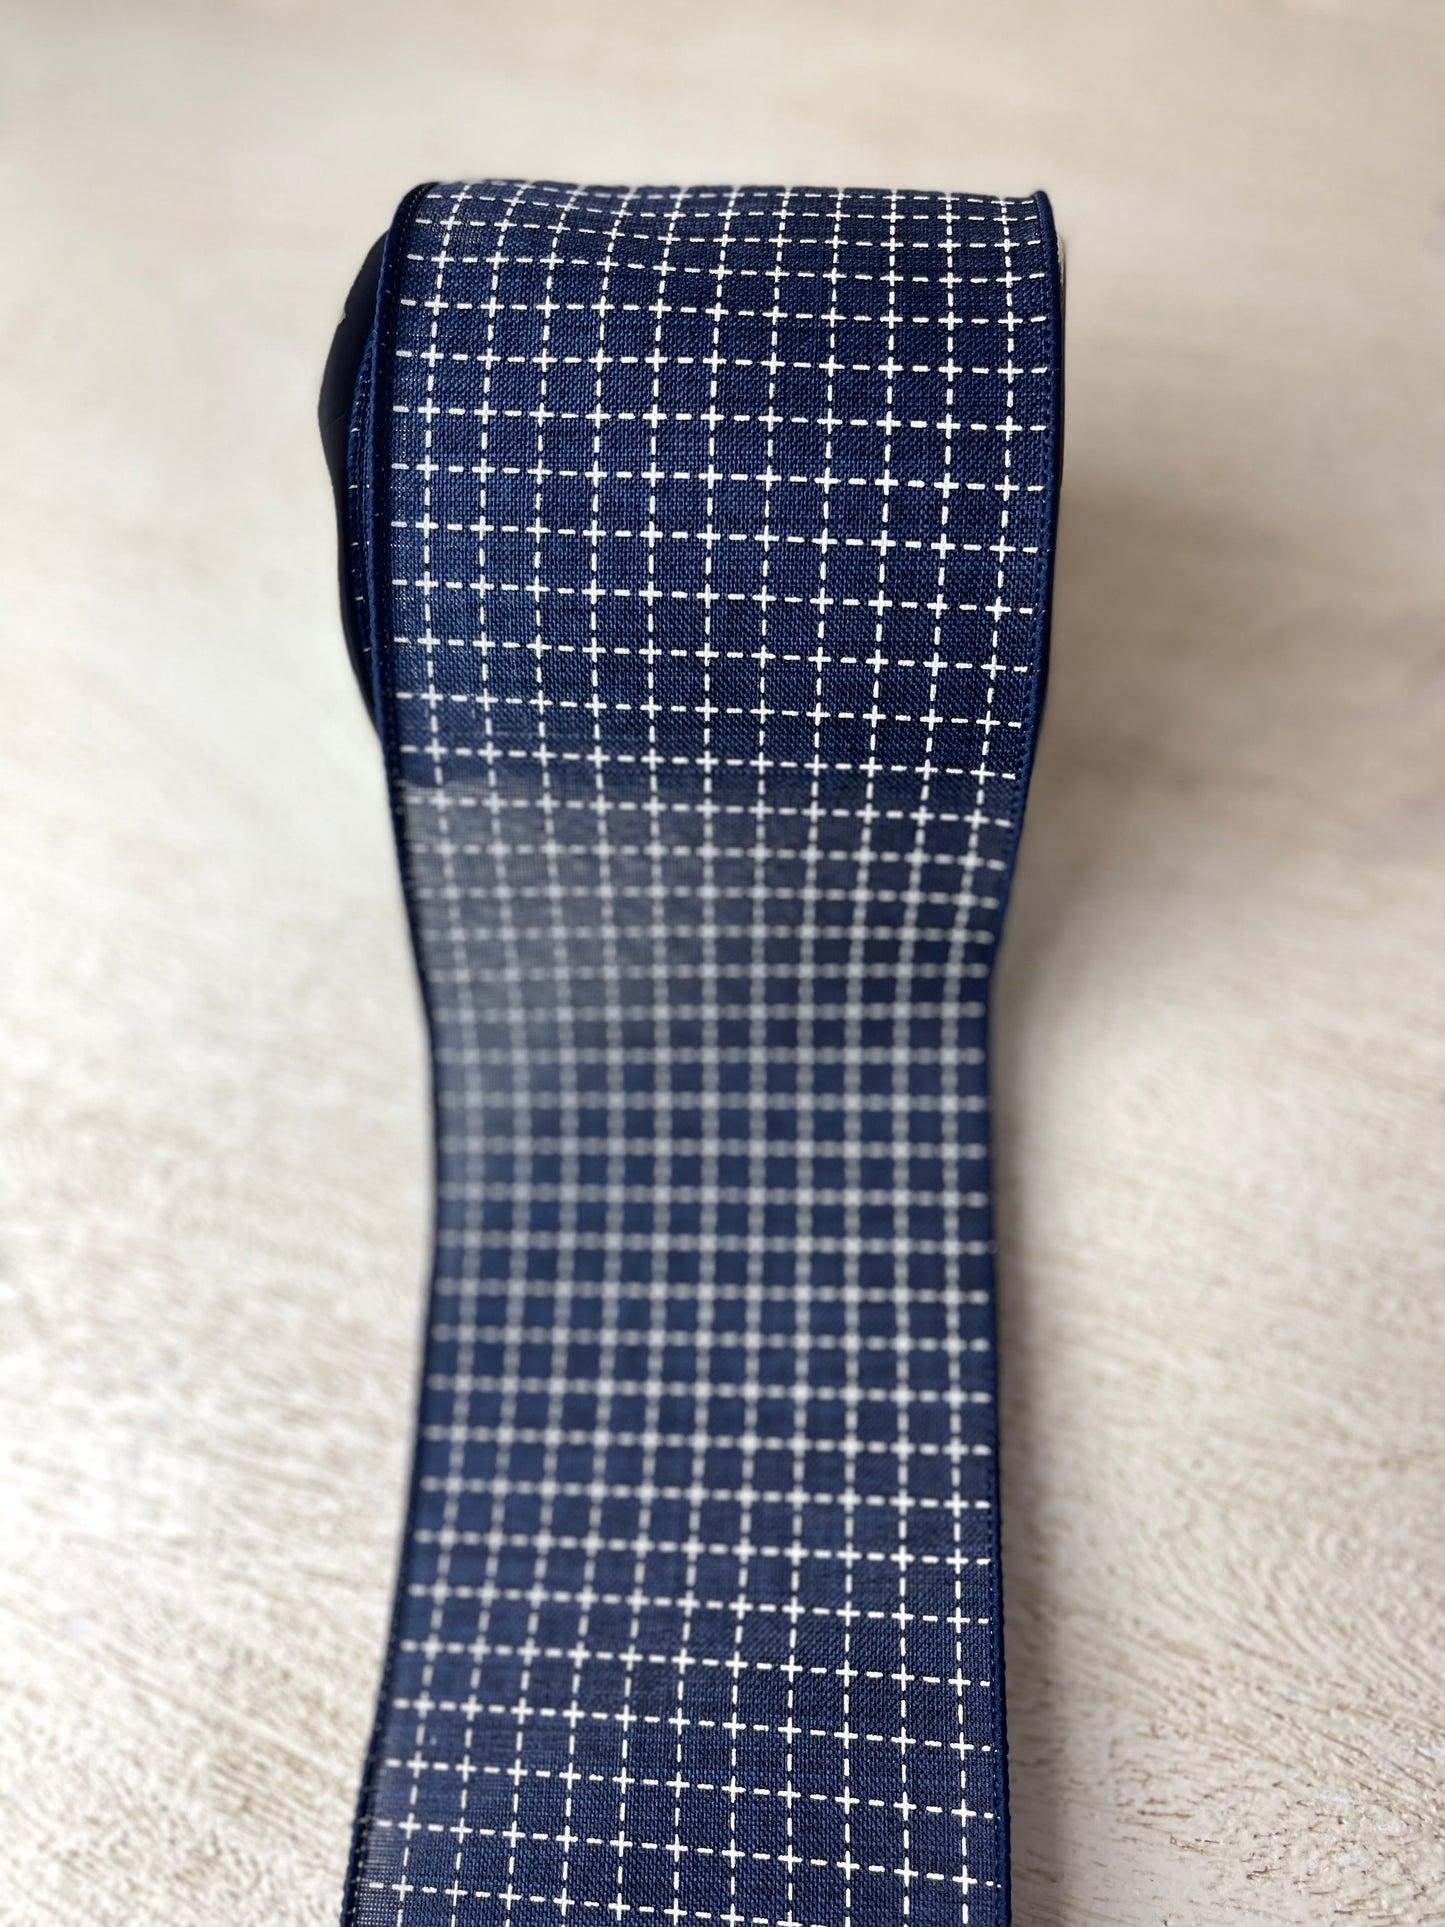 4 Inch By 10 Yard Navy Blue And White Raised Stitched Squares Ribbon